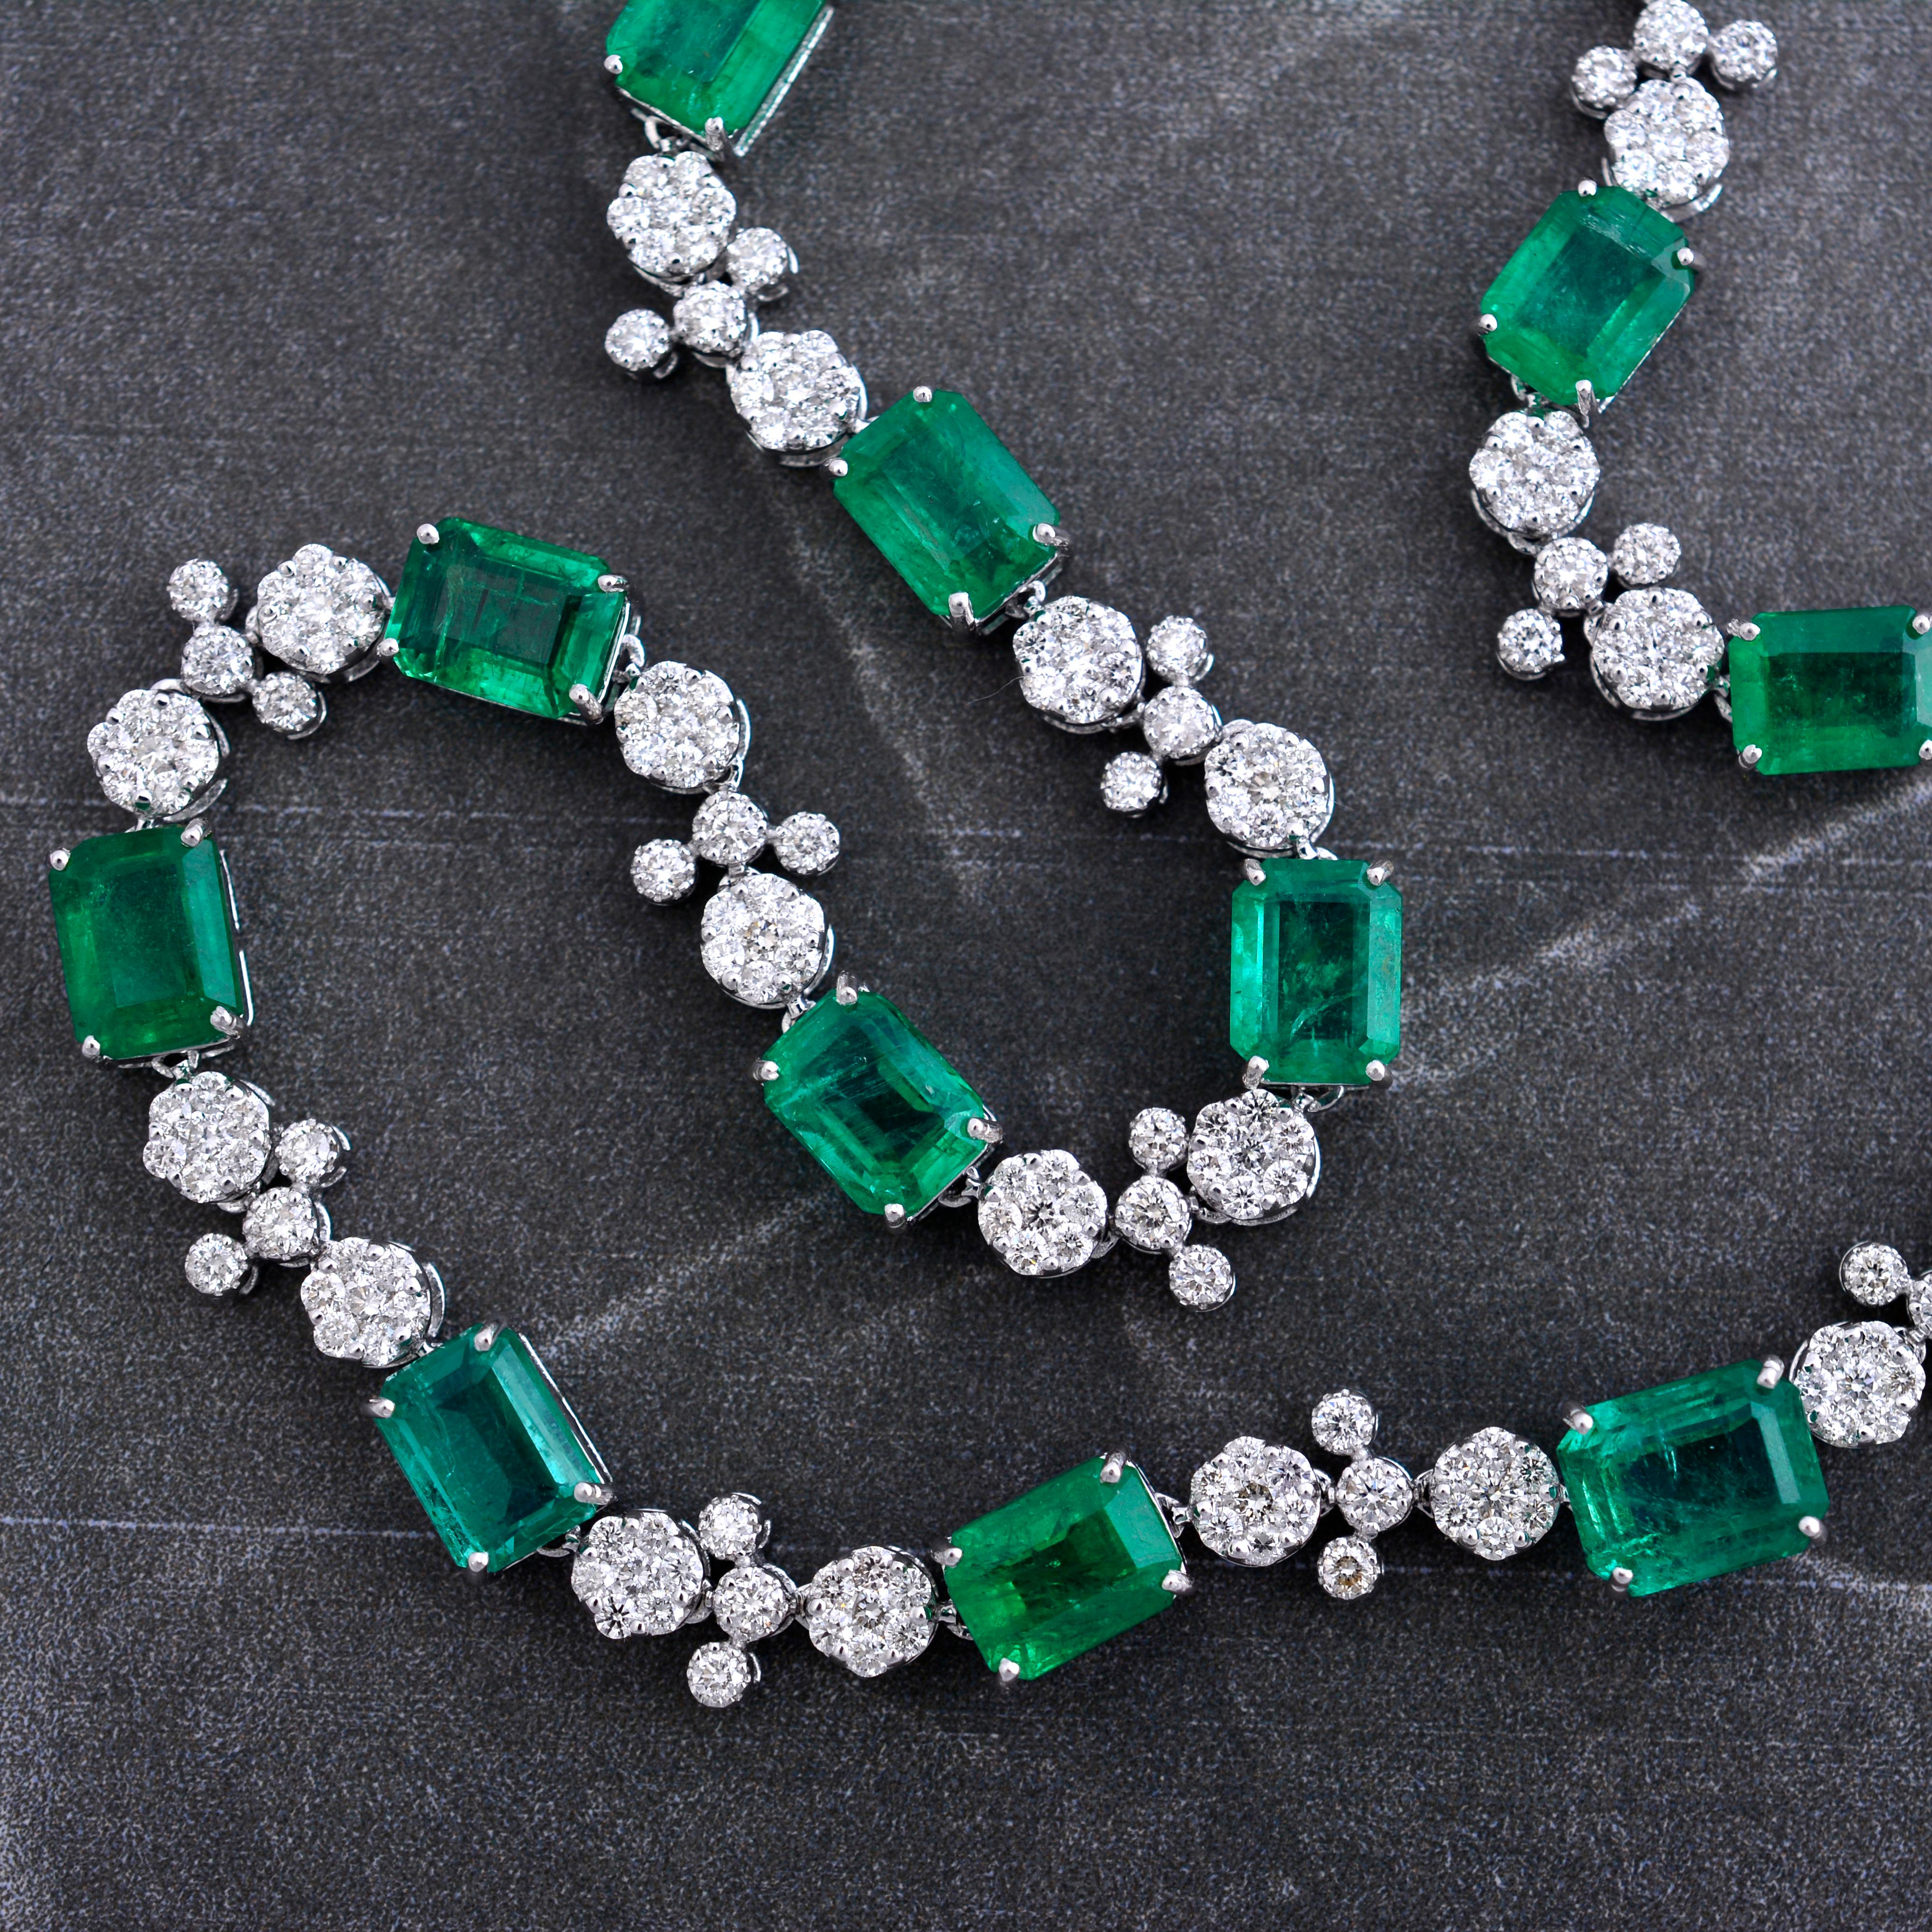 Enhance your jewelry collection with this breathtaking necklace featuring a natural emerald gemstone adorned with a dazzling diamond pave. Meticulously crafted from 14 karat white gold, this fine jewelry piece exudes luxury, sophistication, and